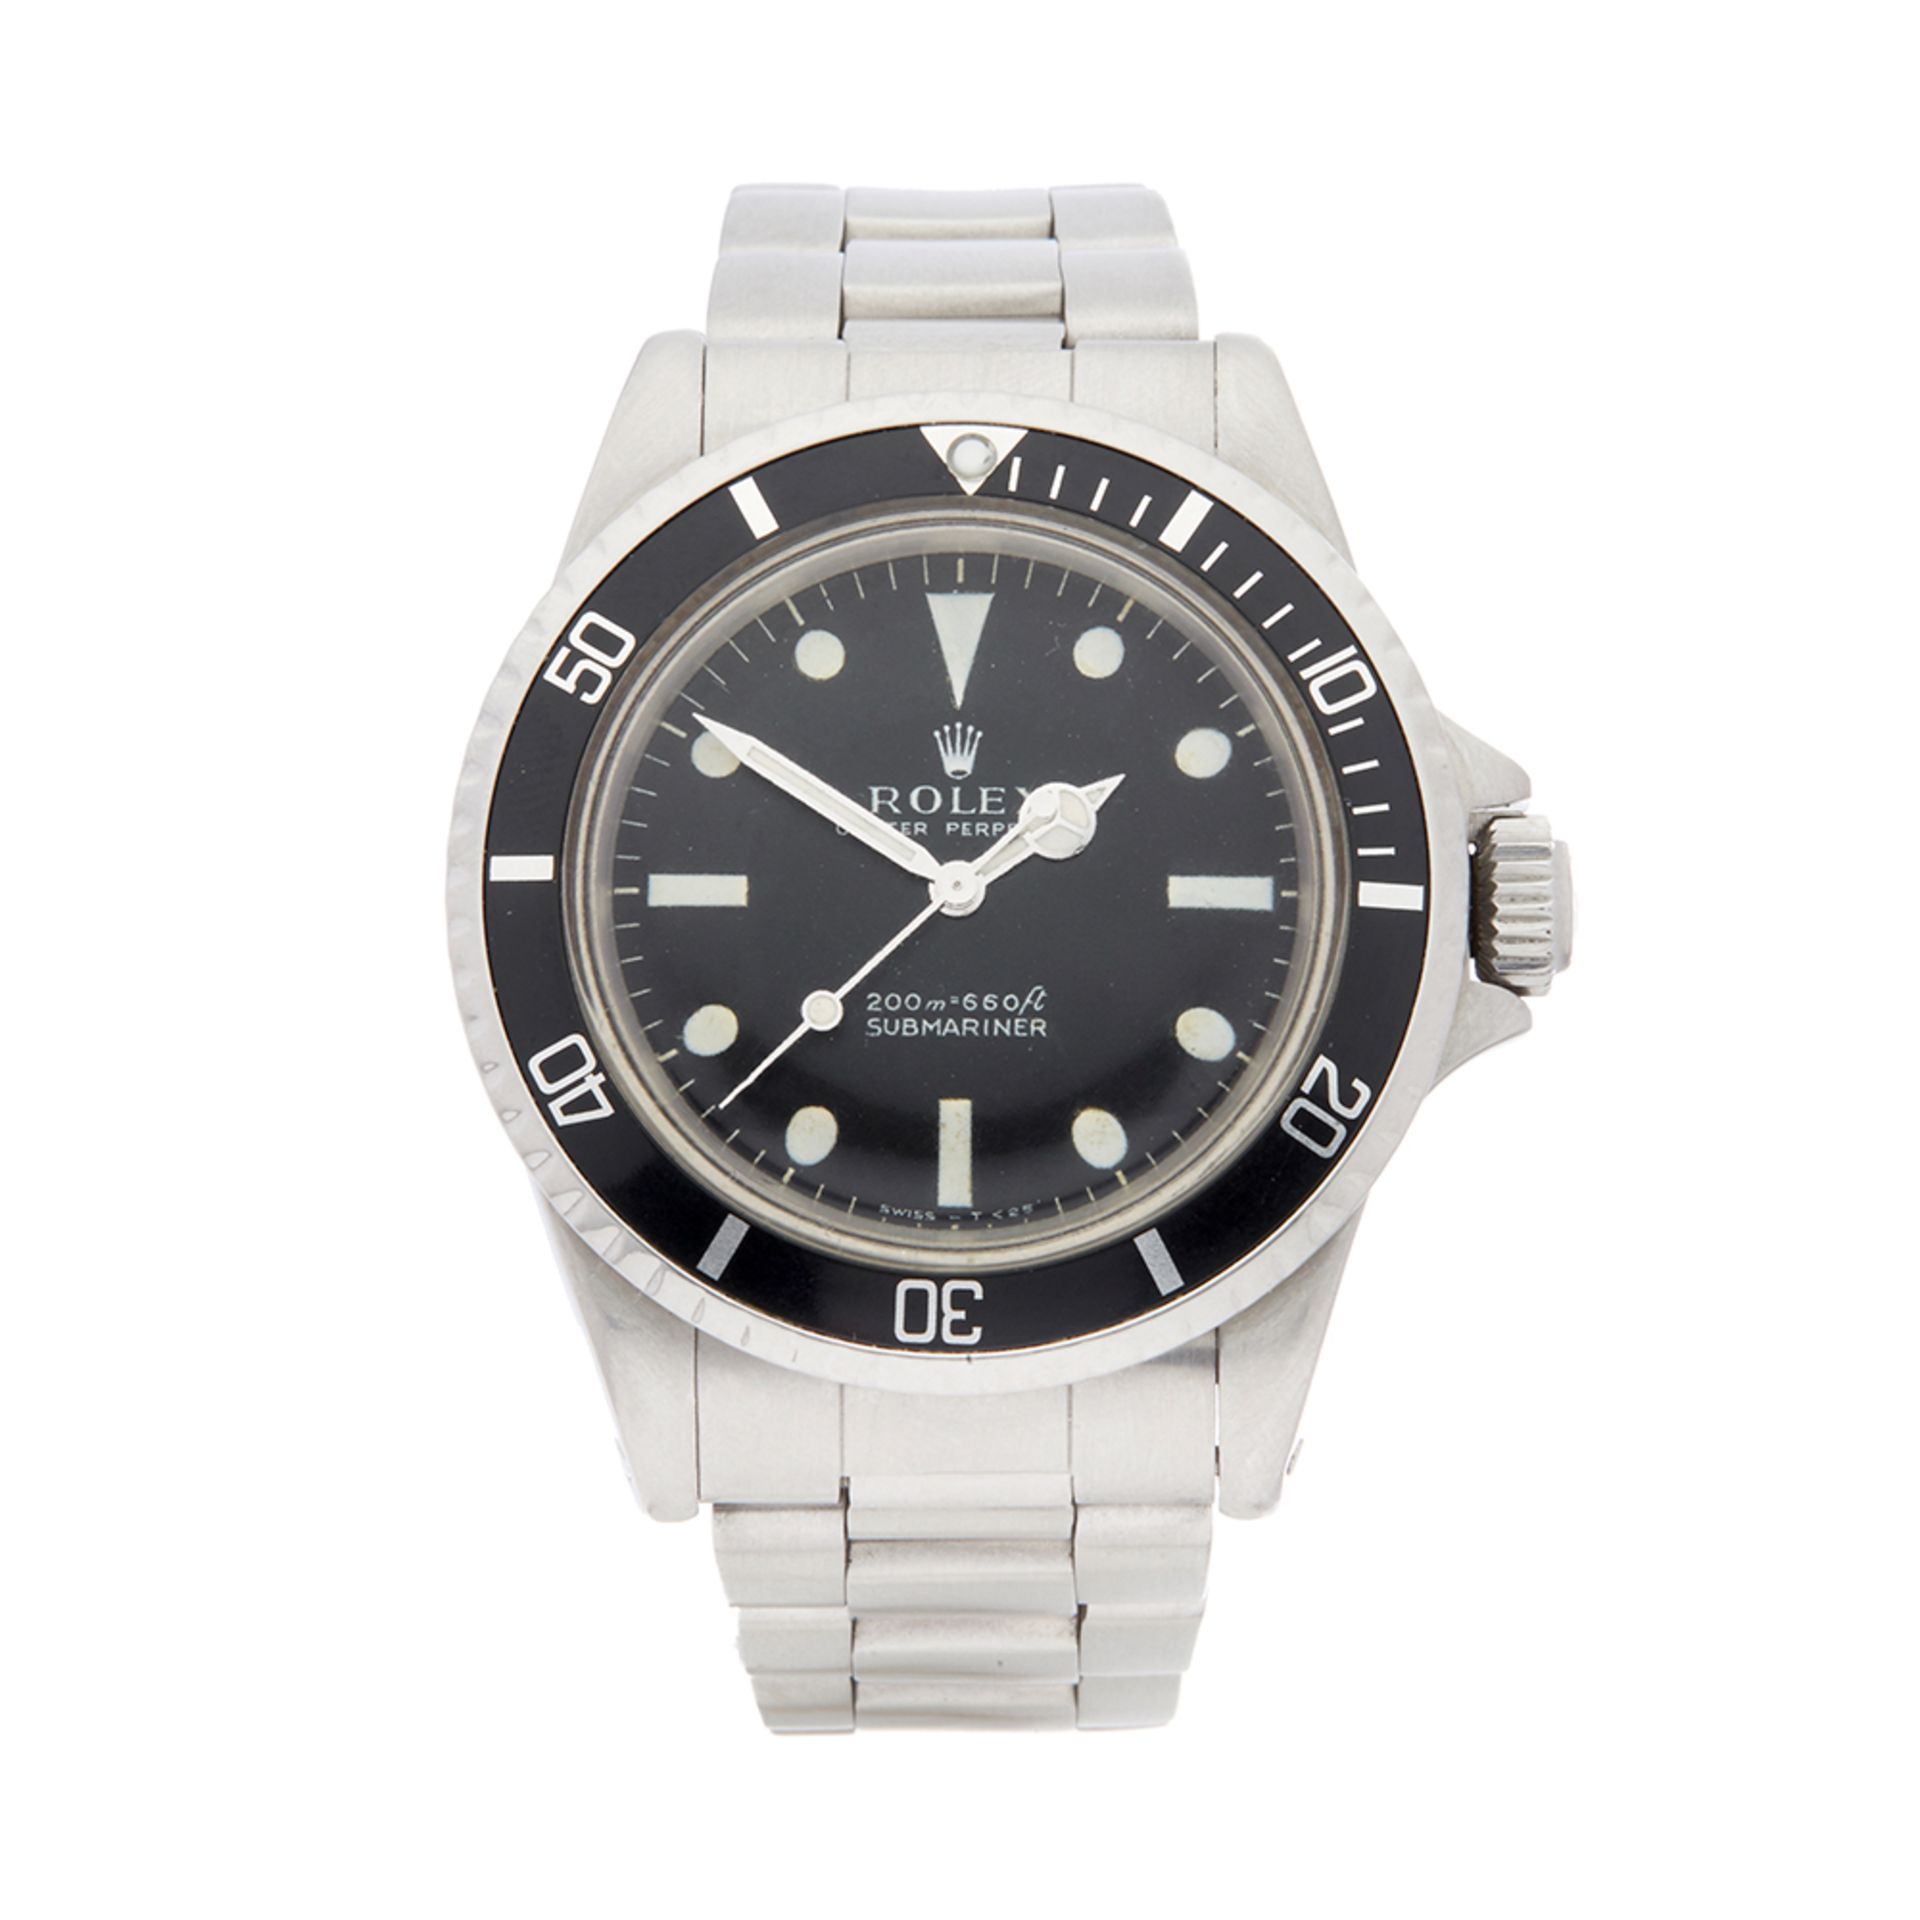 Rolex Submariner Meters First Stainless Steel - 5513 - Image 2 of 8